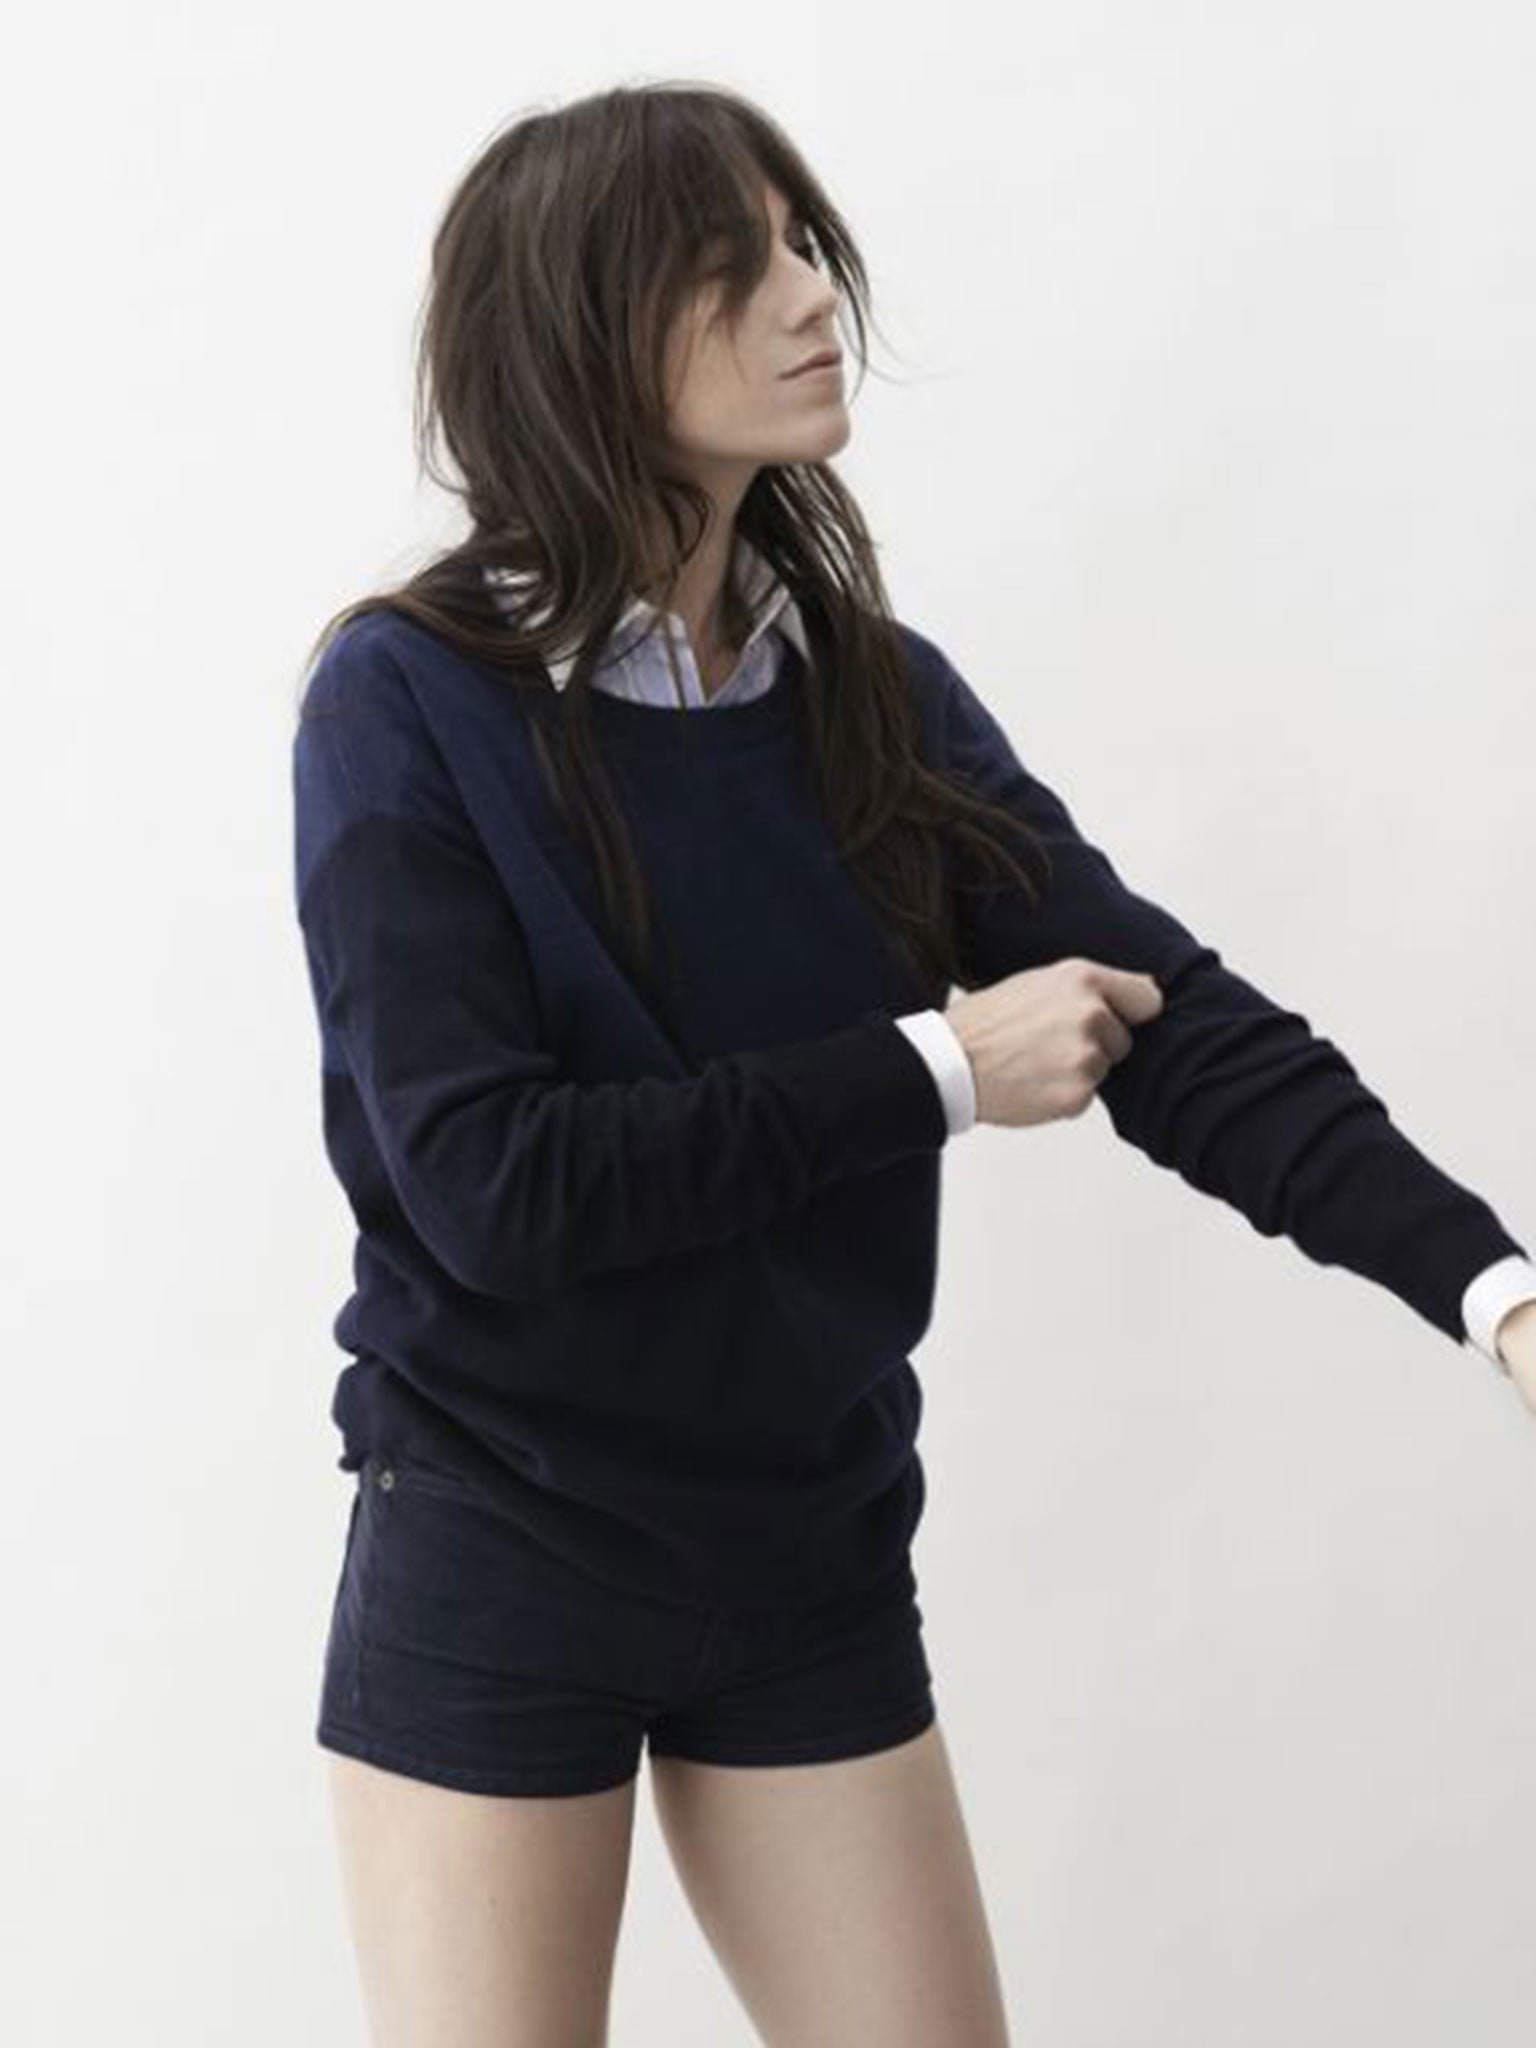 Charlotte Gainsbourg has long been a style icon